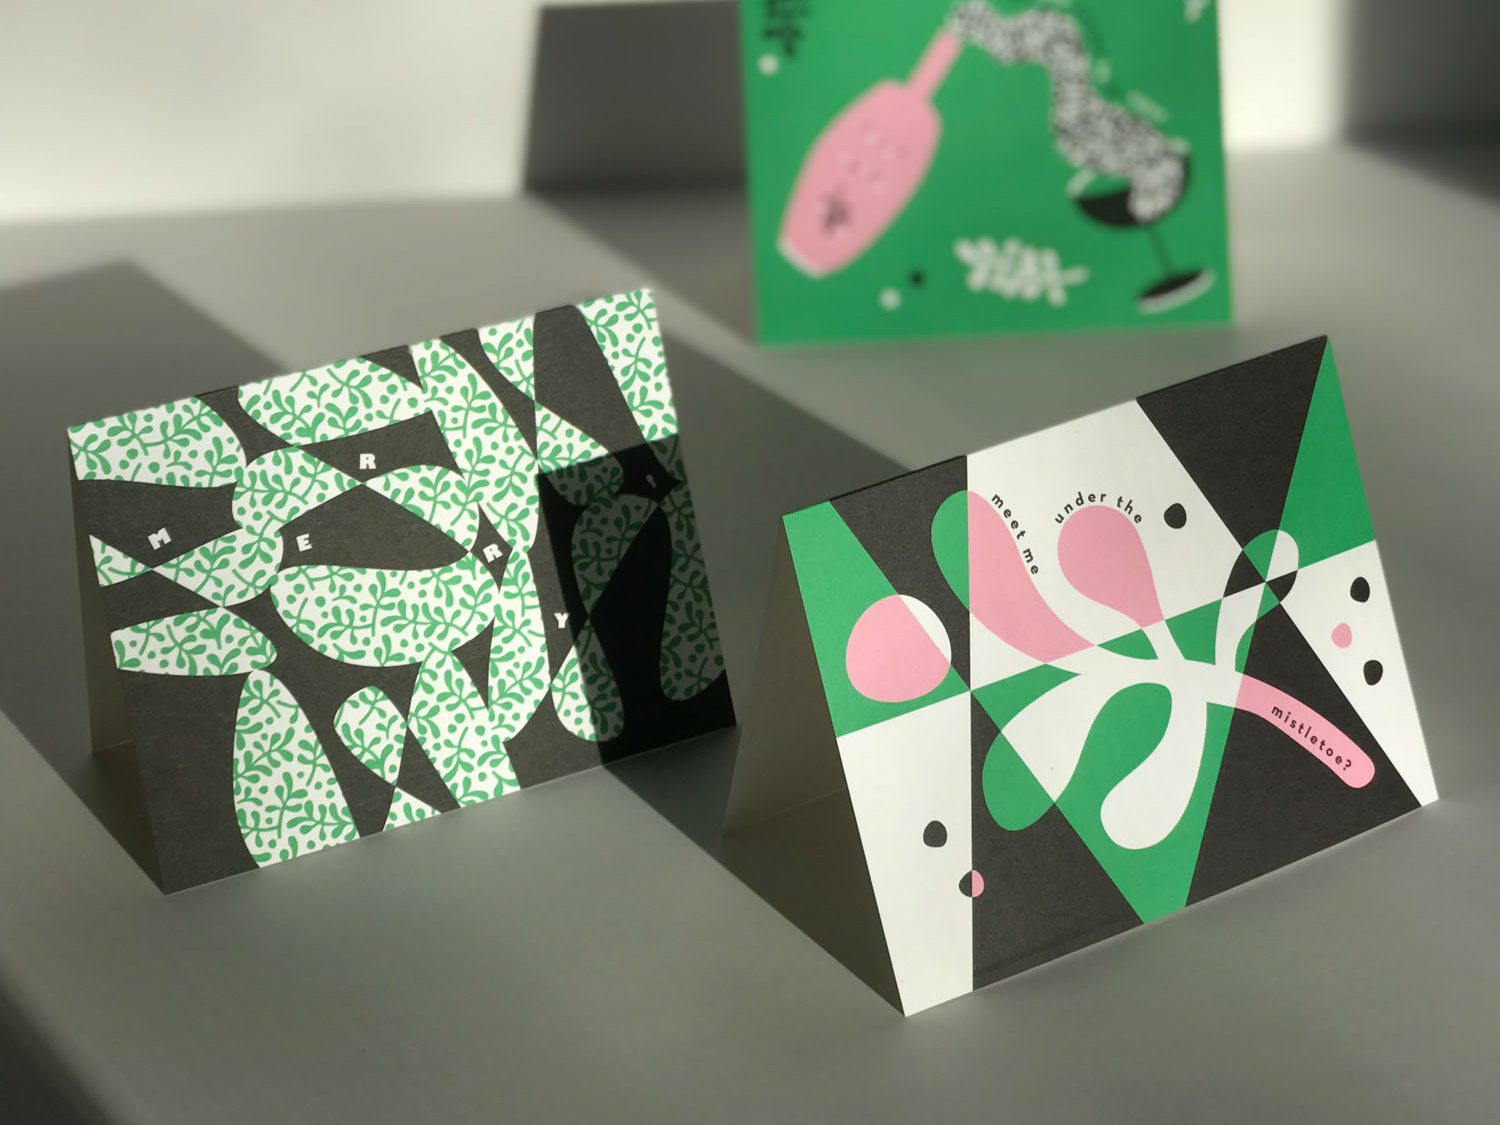 Pink and green retro, mid-century inspired Christmas and holiday cards by @mydarlin_bk